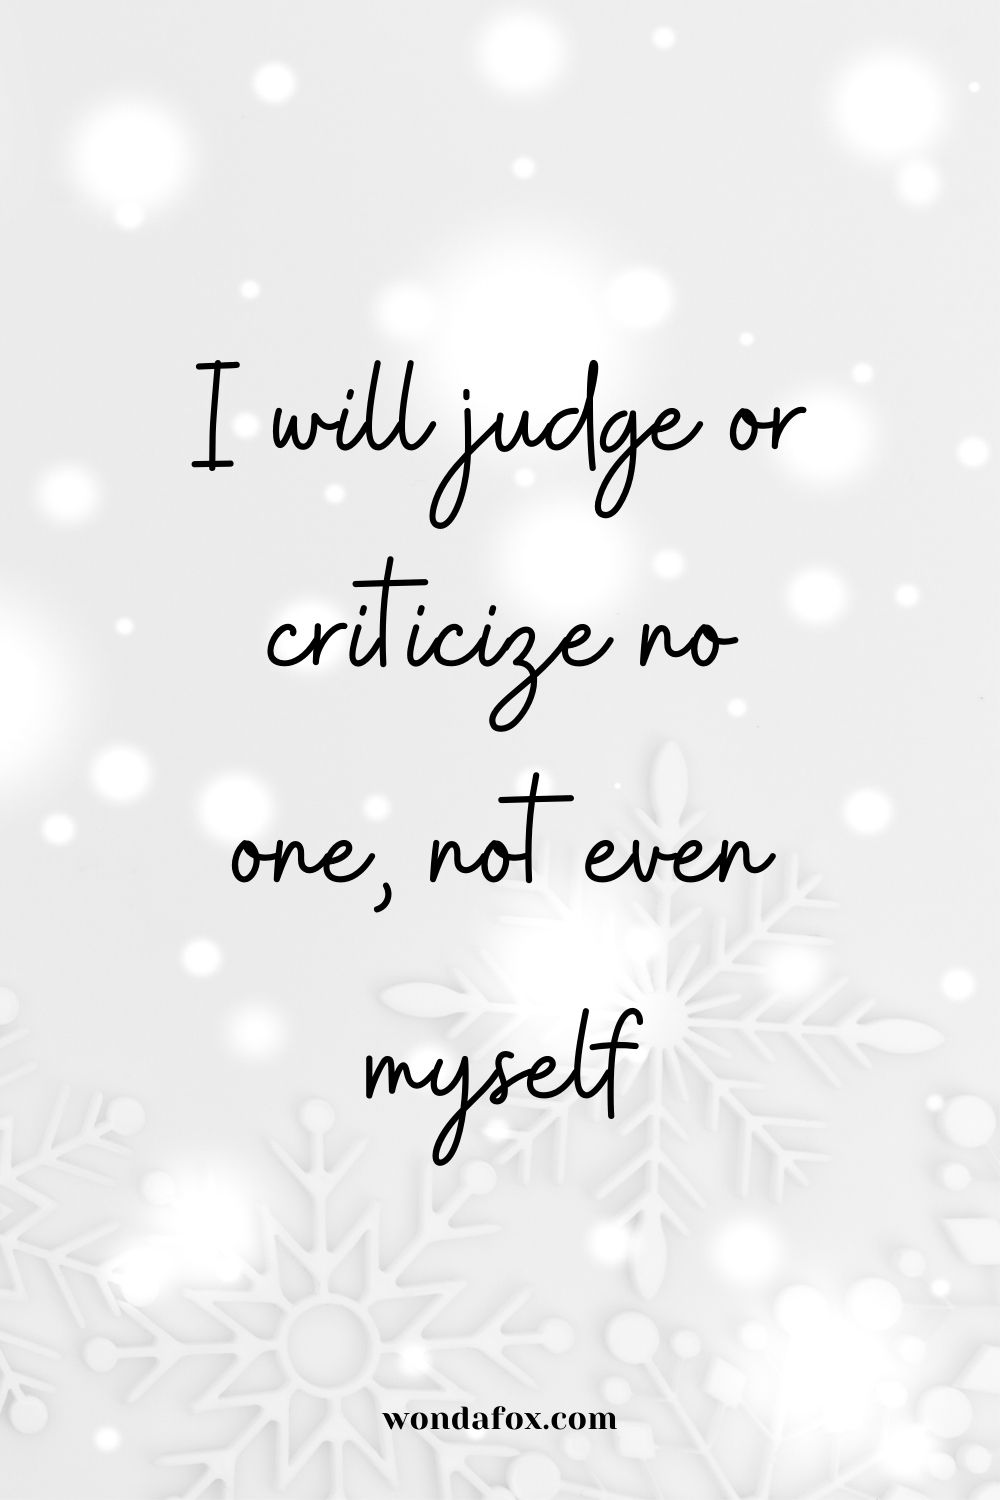  I will judge or criticize no one, not even myself